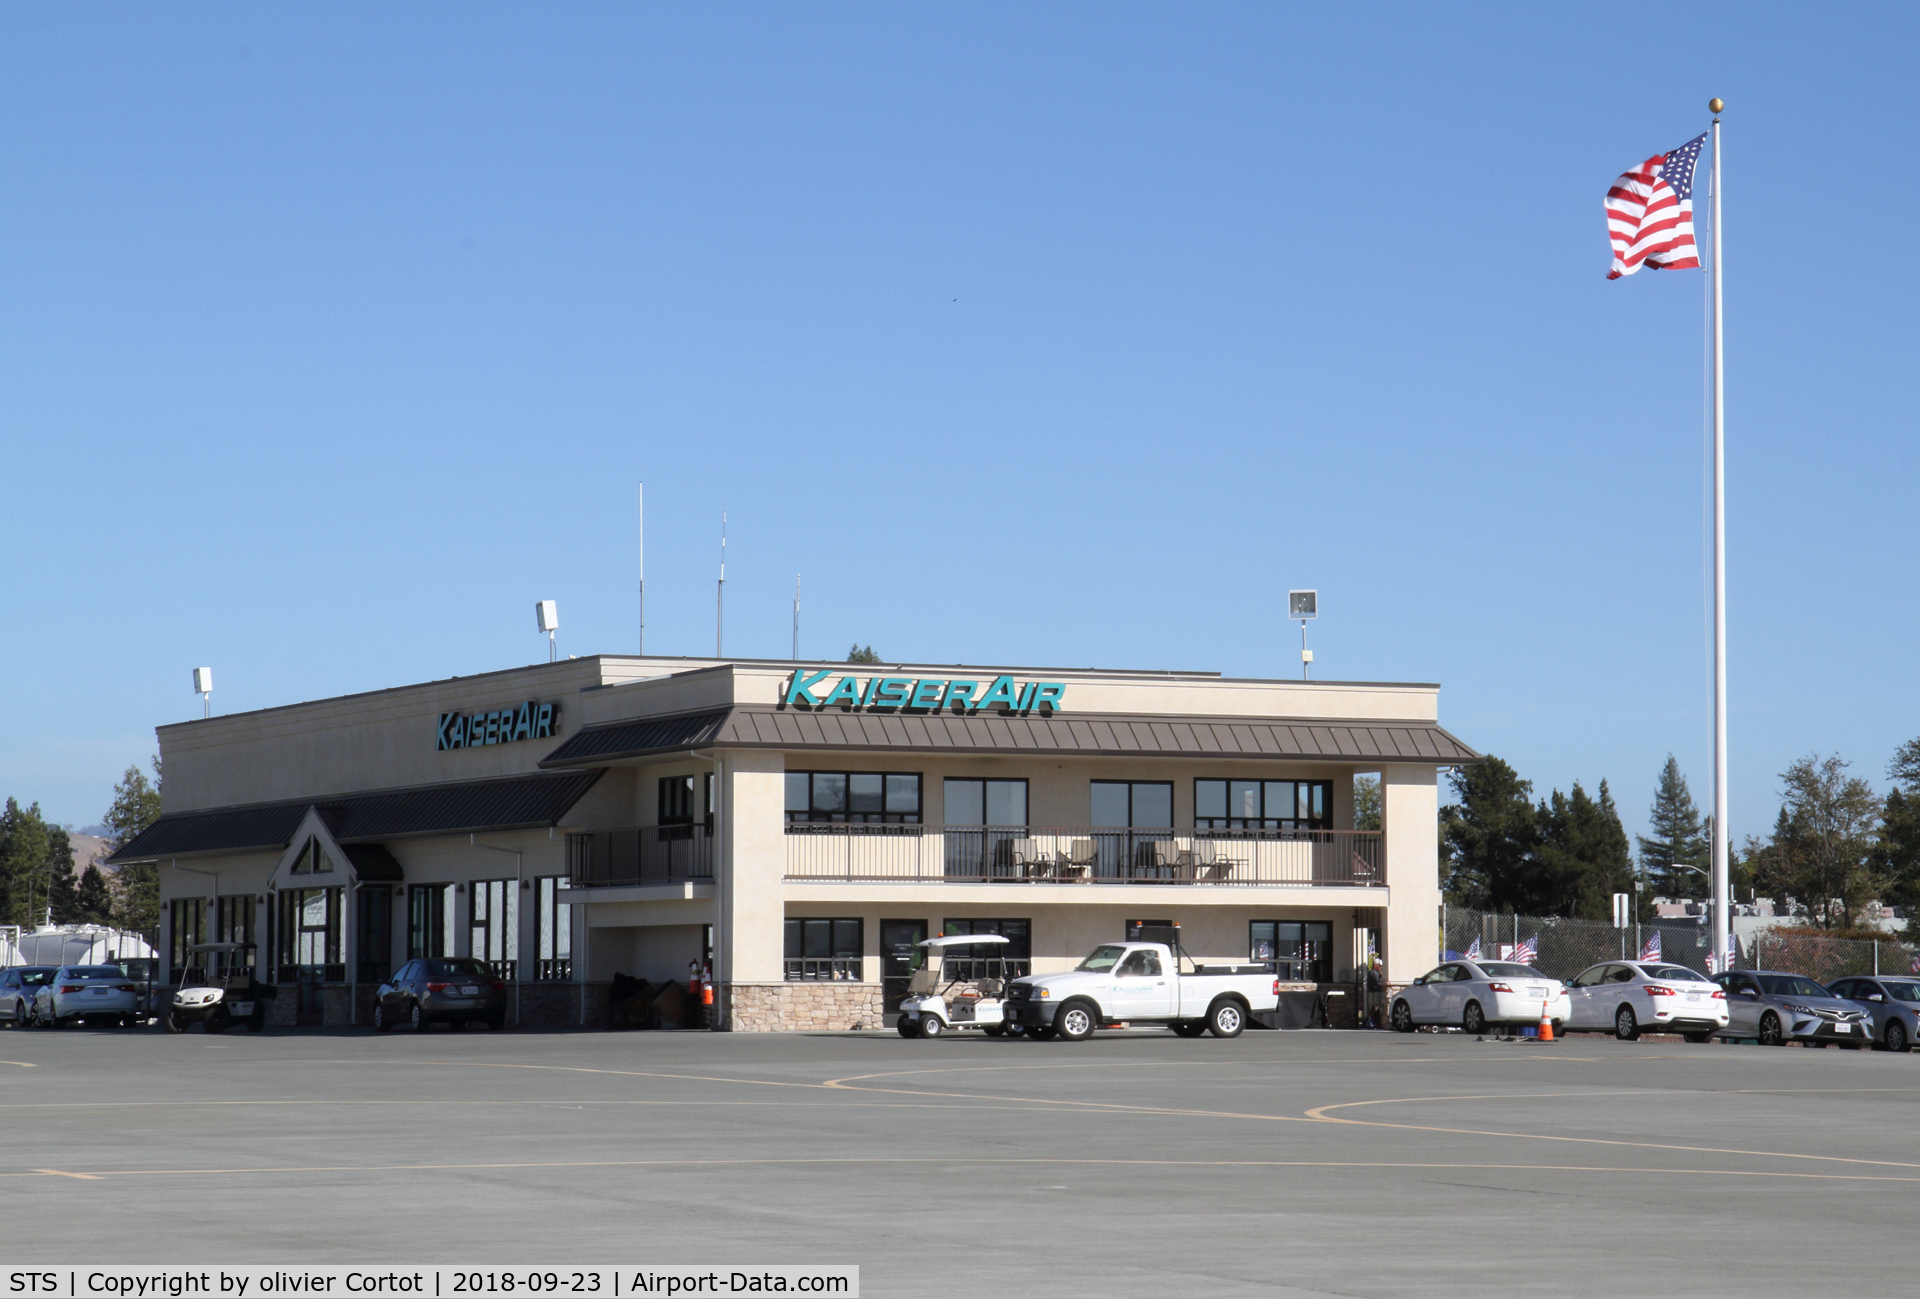 Charles M. Schulz - Sonoma County Airport (STS) - a company based there